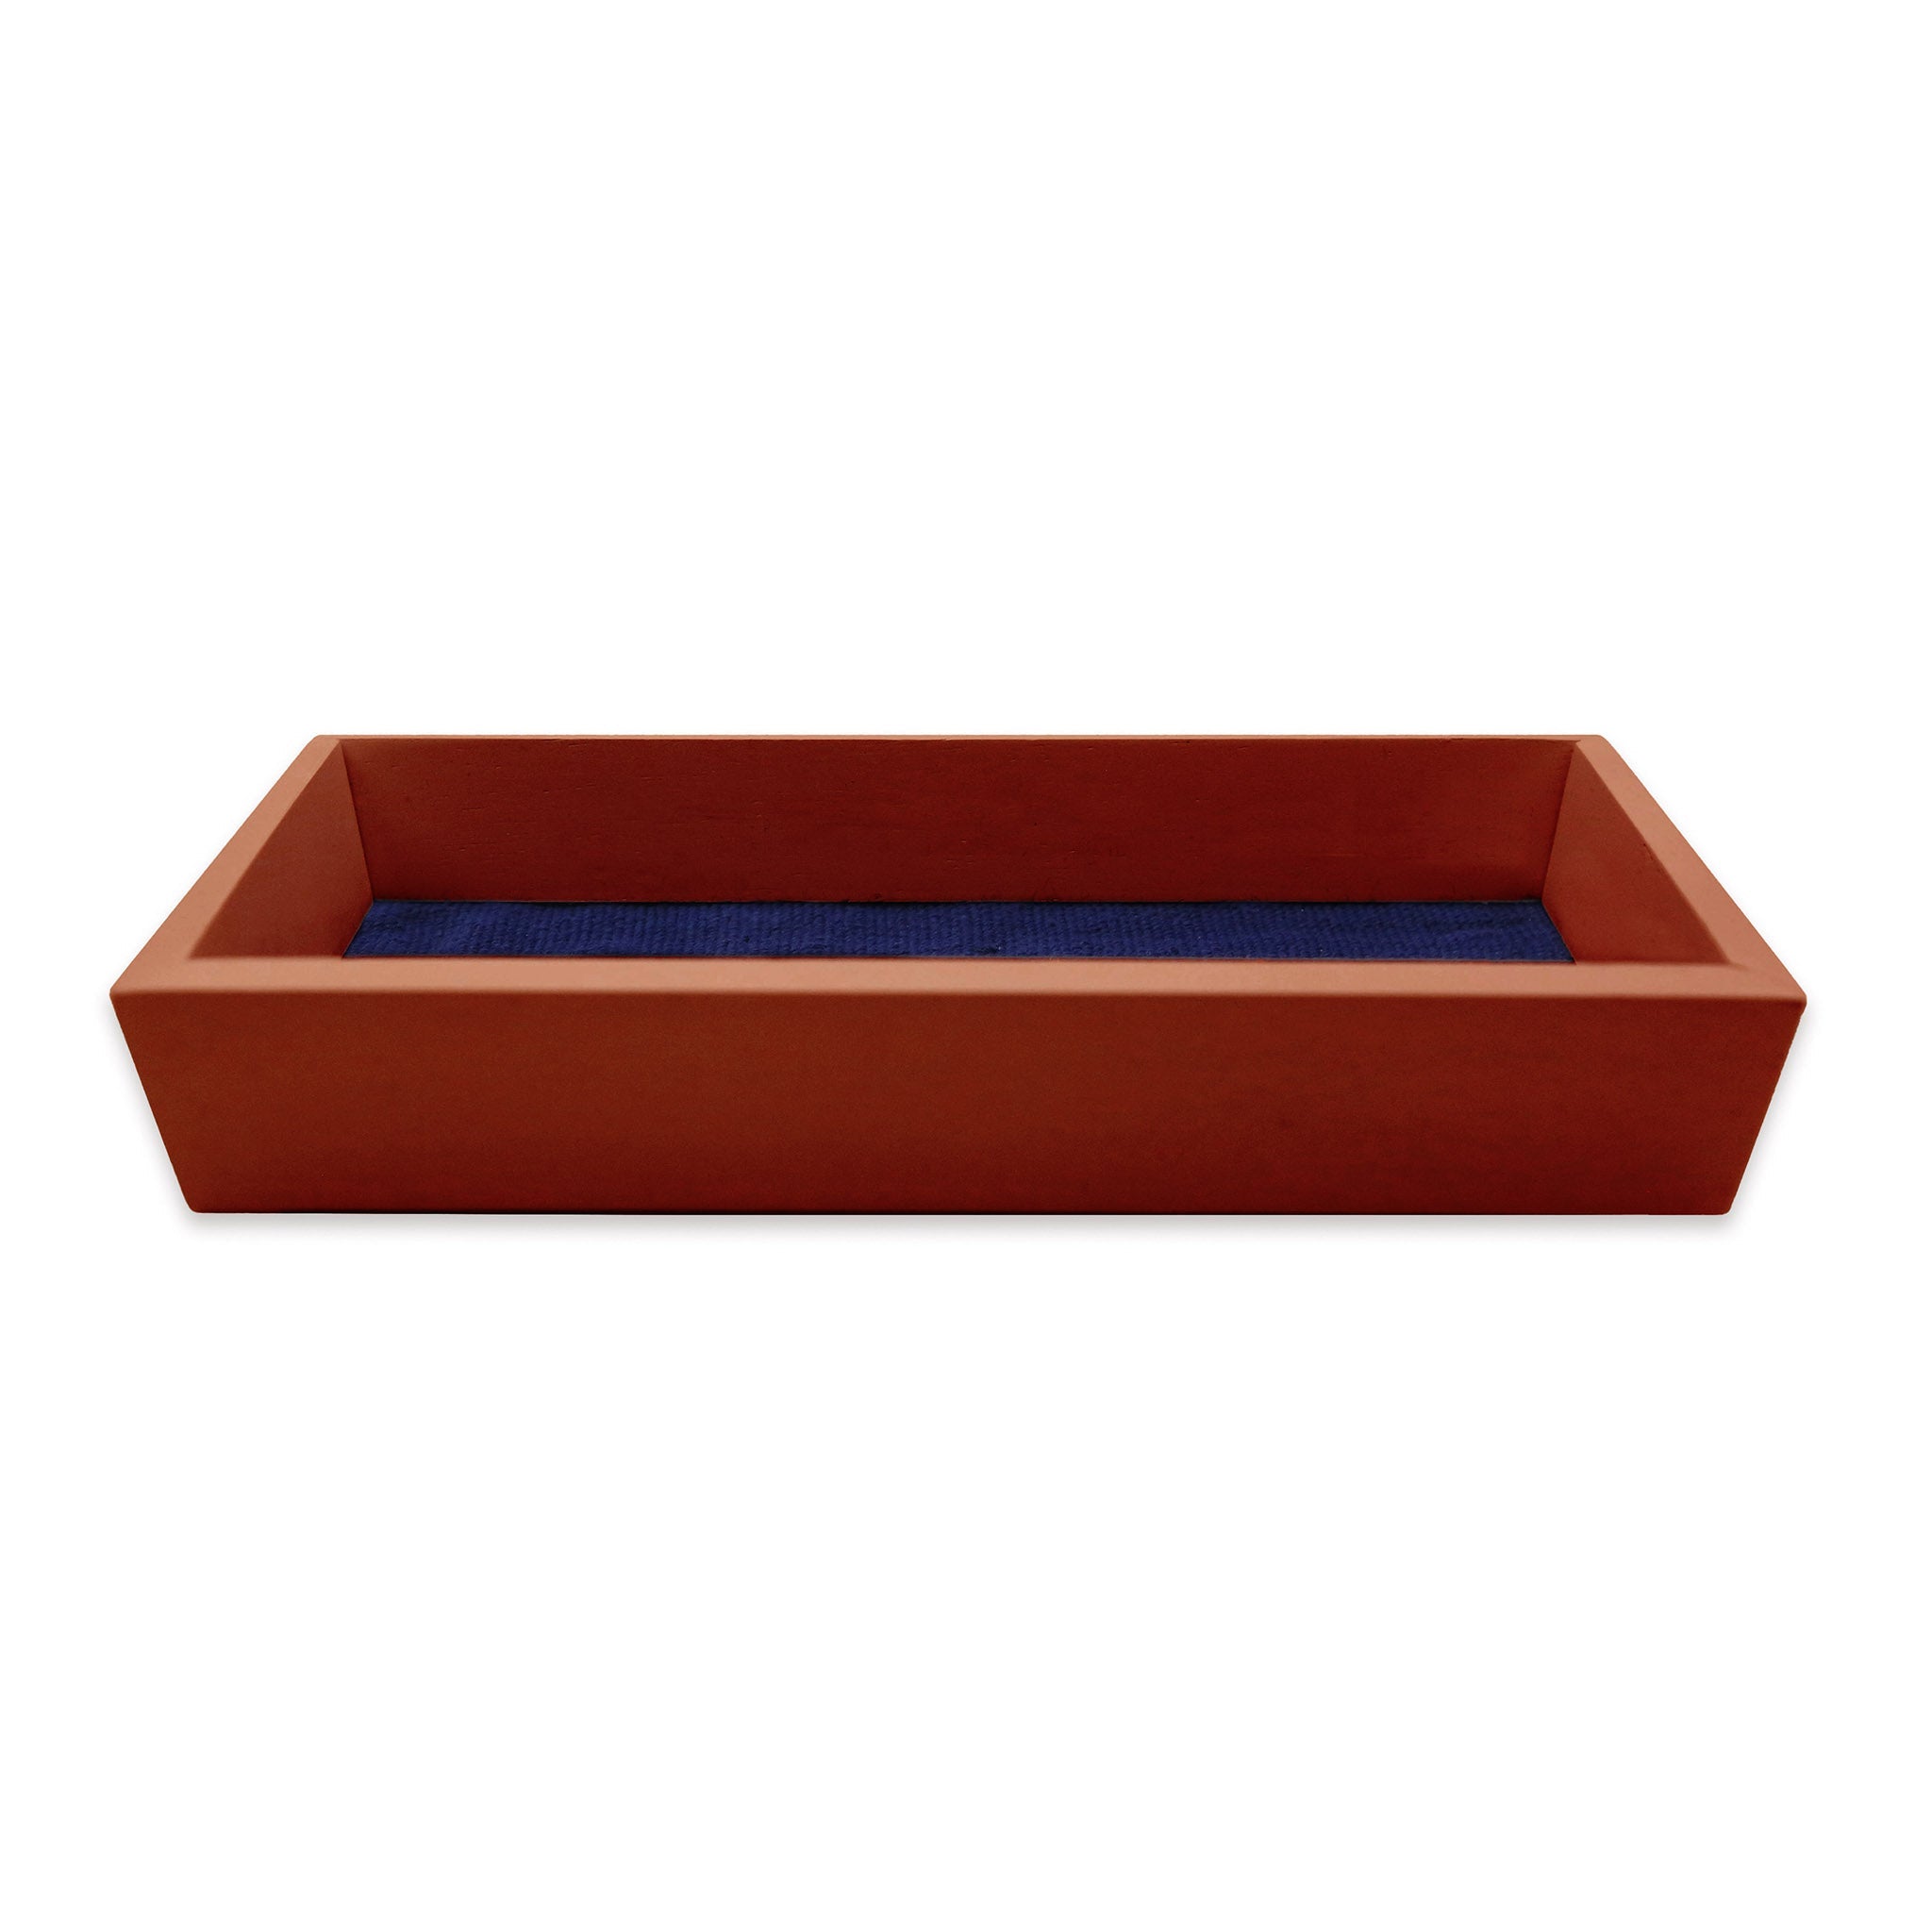 Crossed Clubs Valet Tray (Classic Navy) (Chestnut Wood)